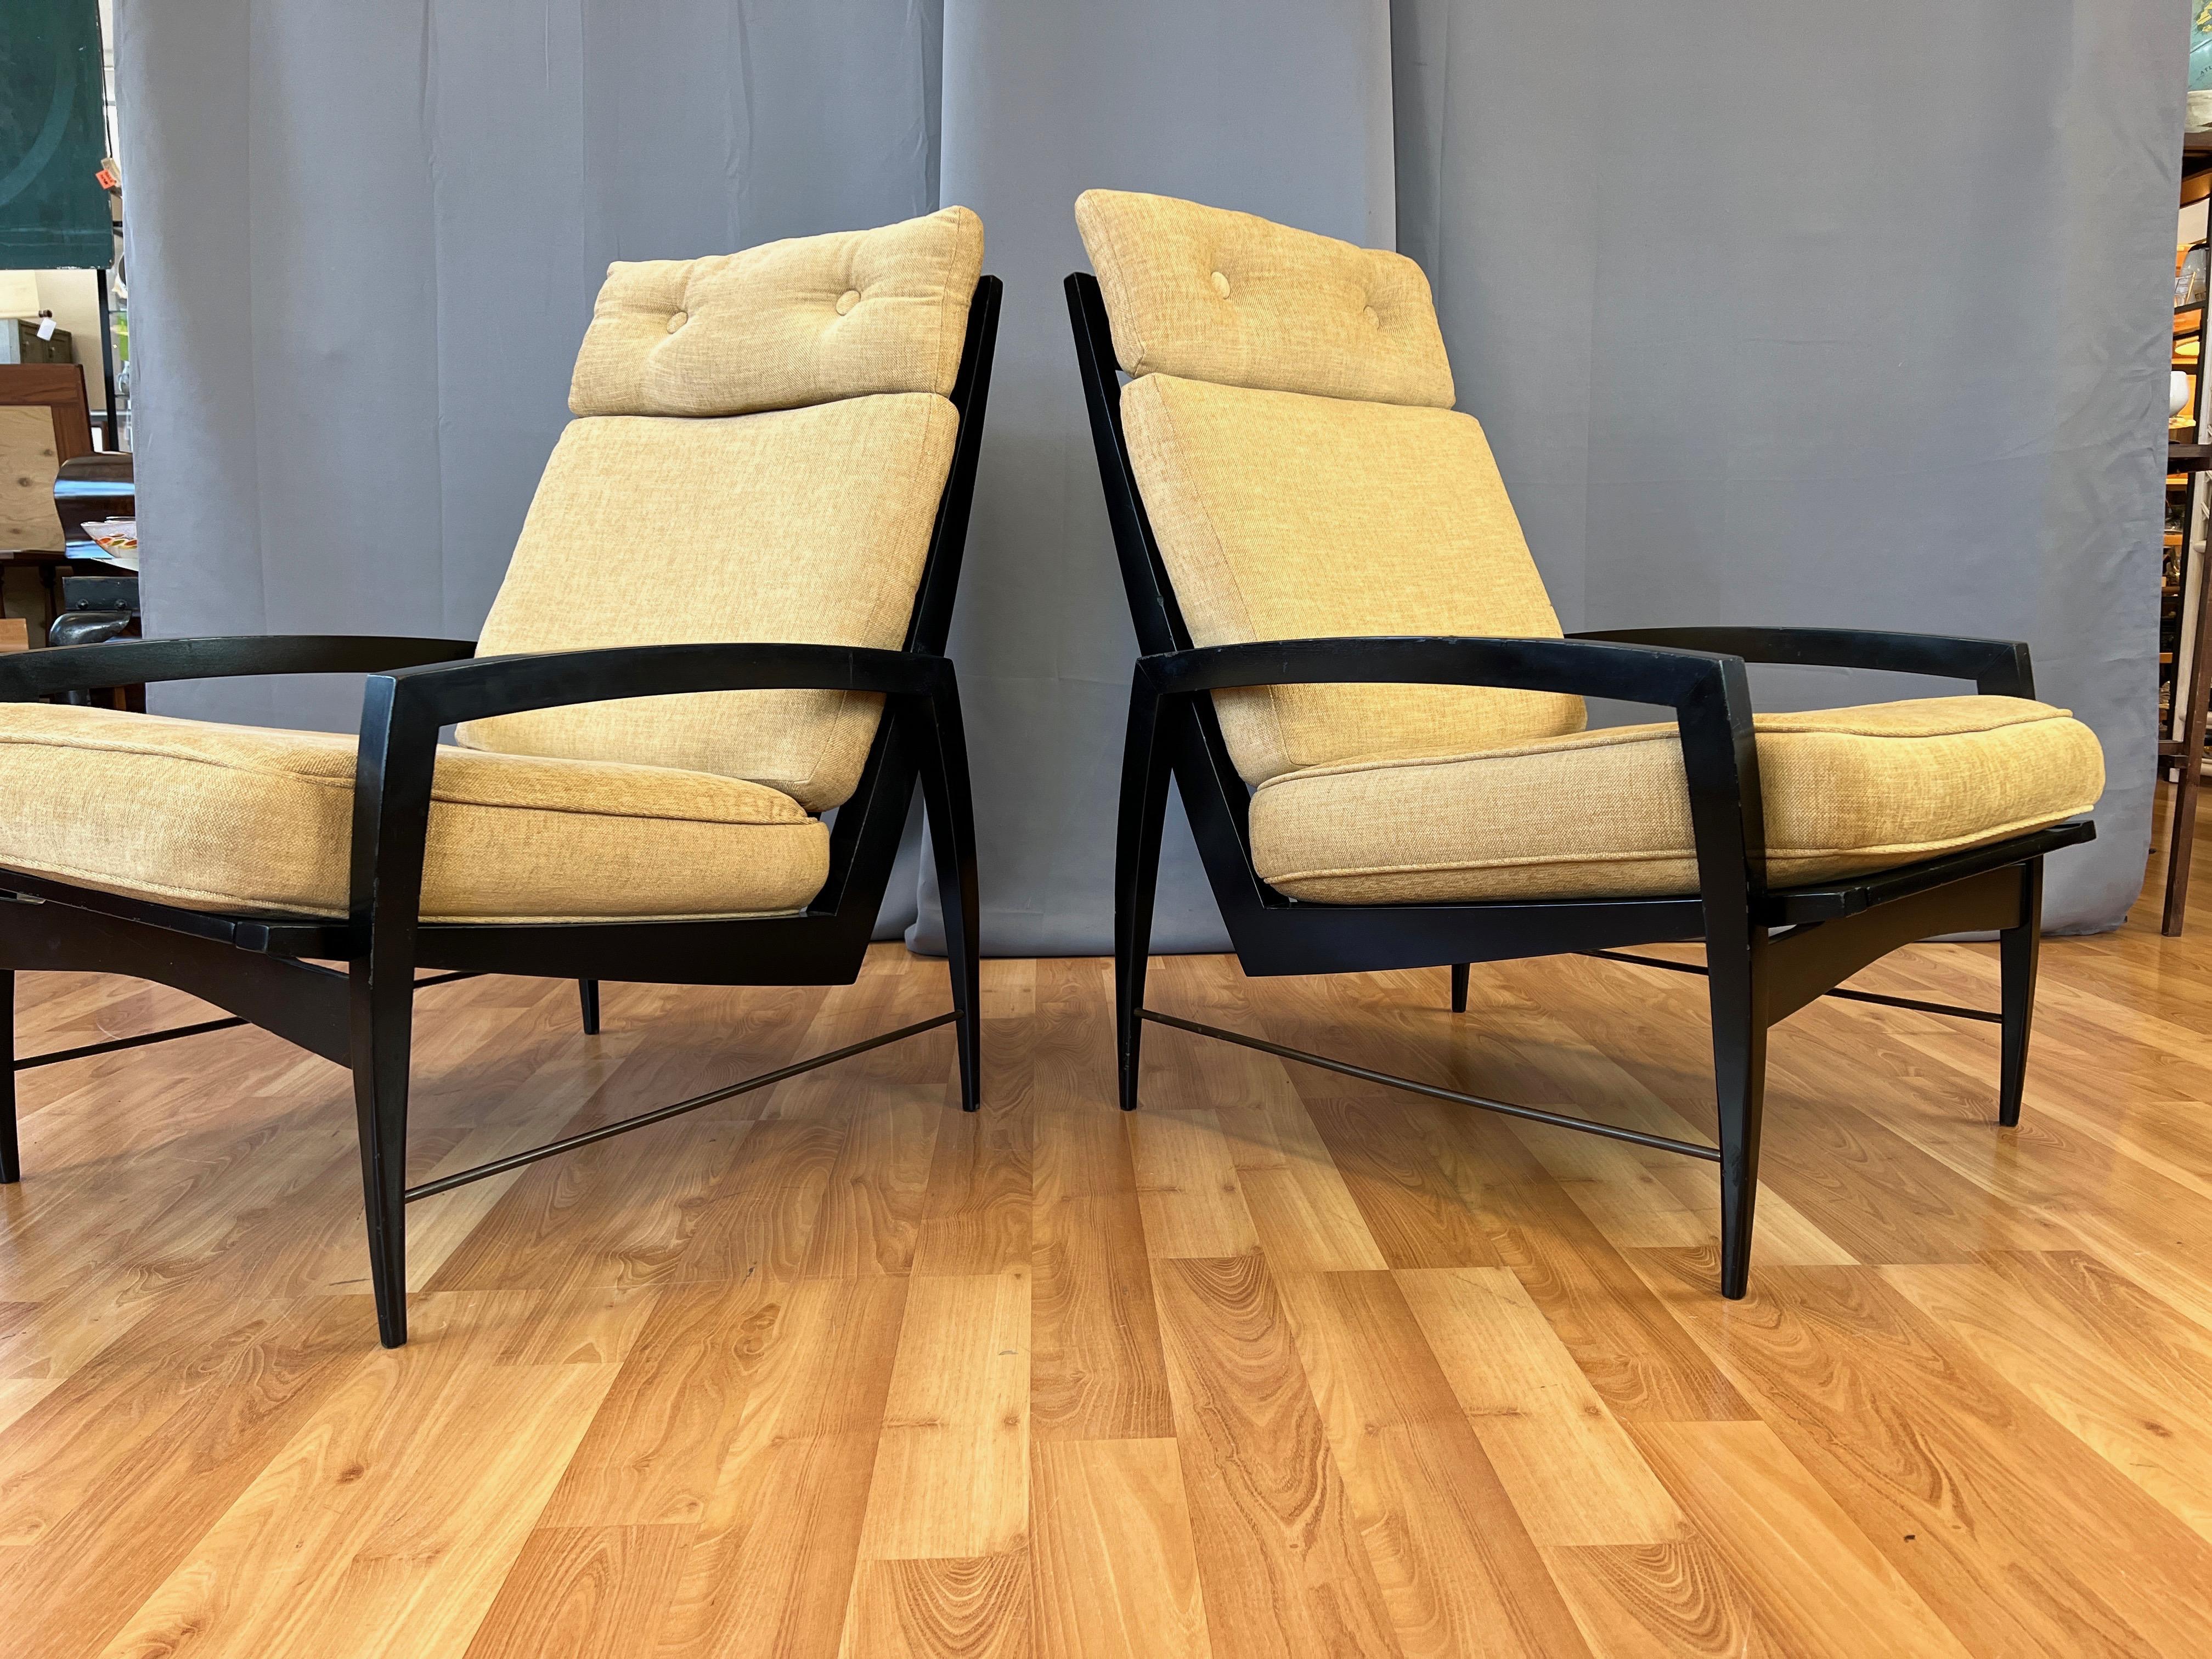 Brass Pair of Dan Johnson for Selig Black Lacquered High-Back Lounge Chairs, 1950s For Sale